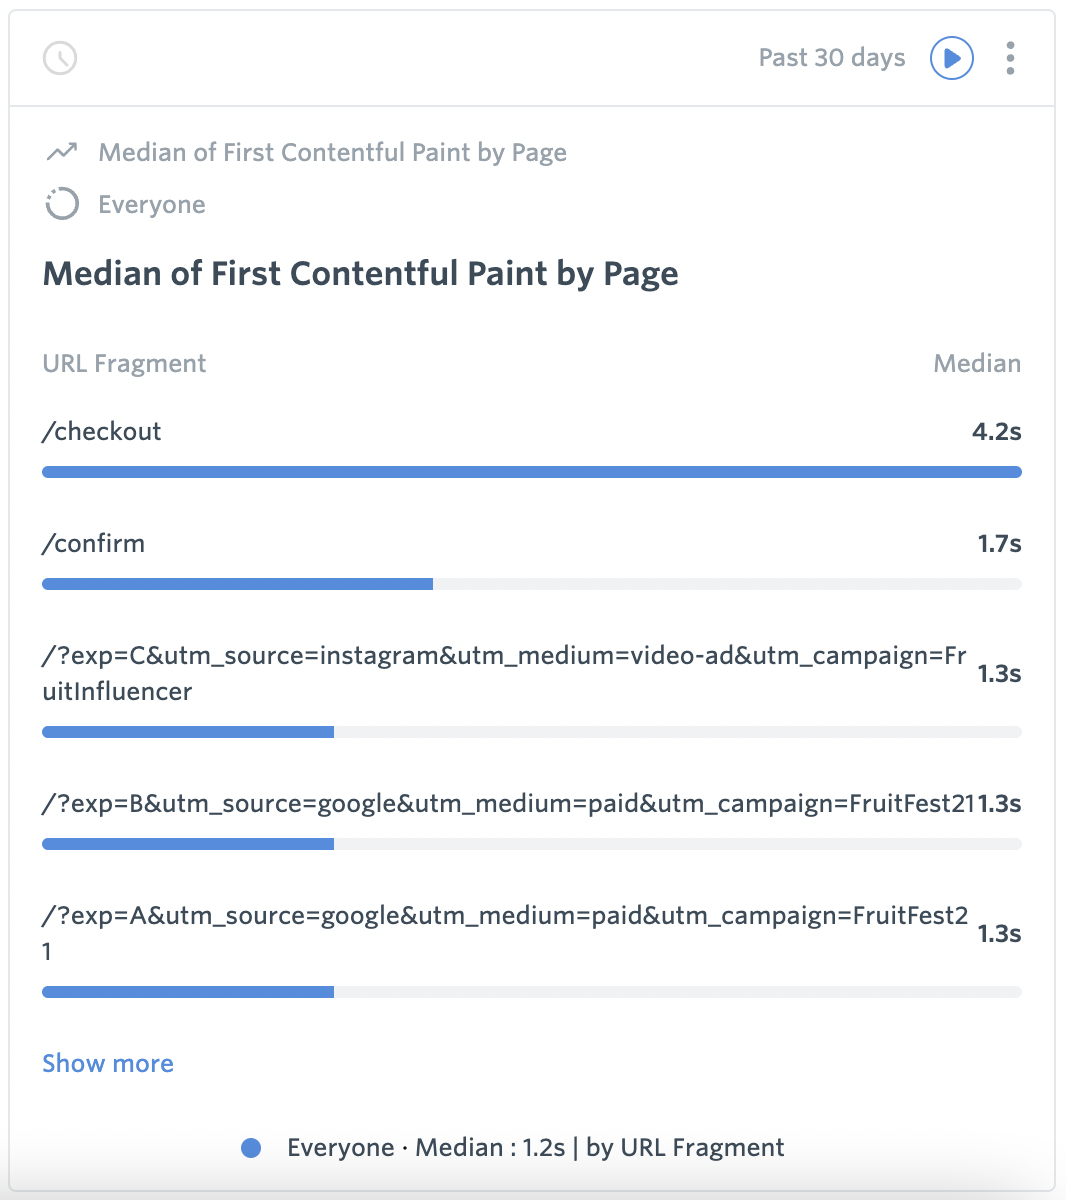 Median of First Contentful Paint by Page